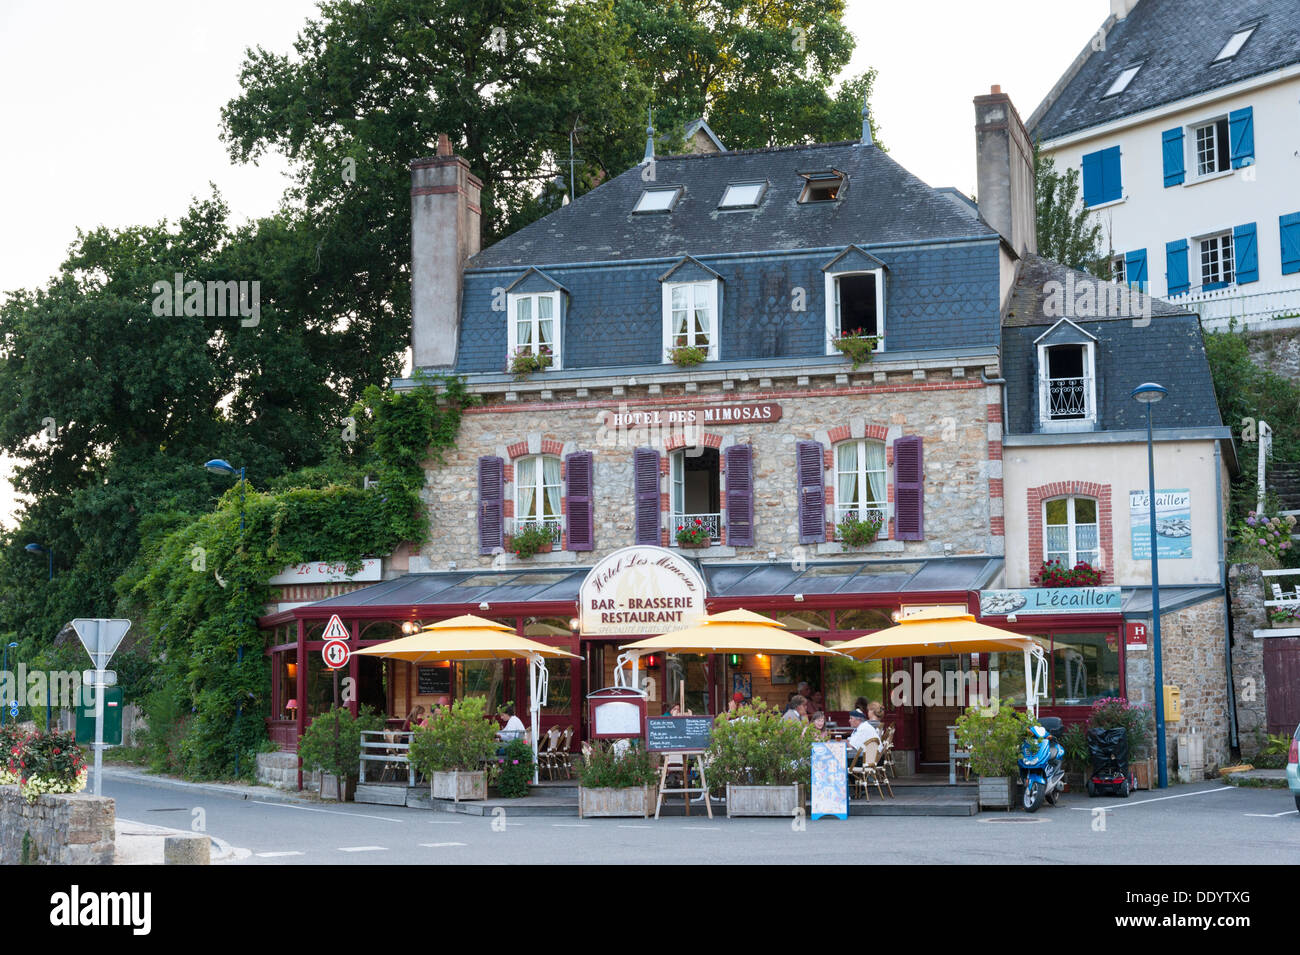 Hotel des Mimosas Pont Aven Brittany France Stock Photo